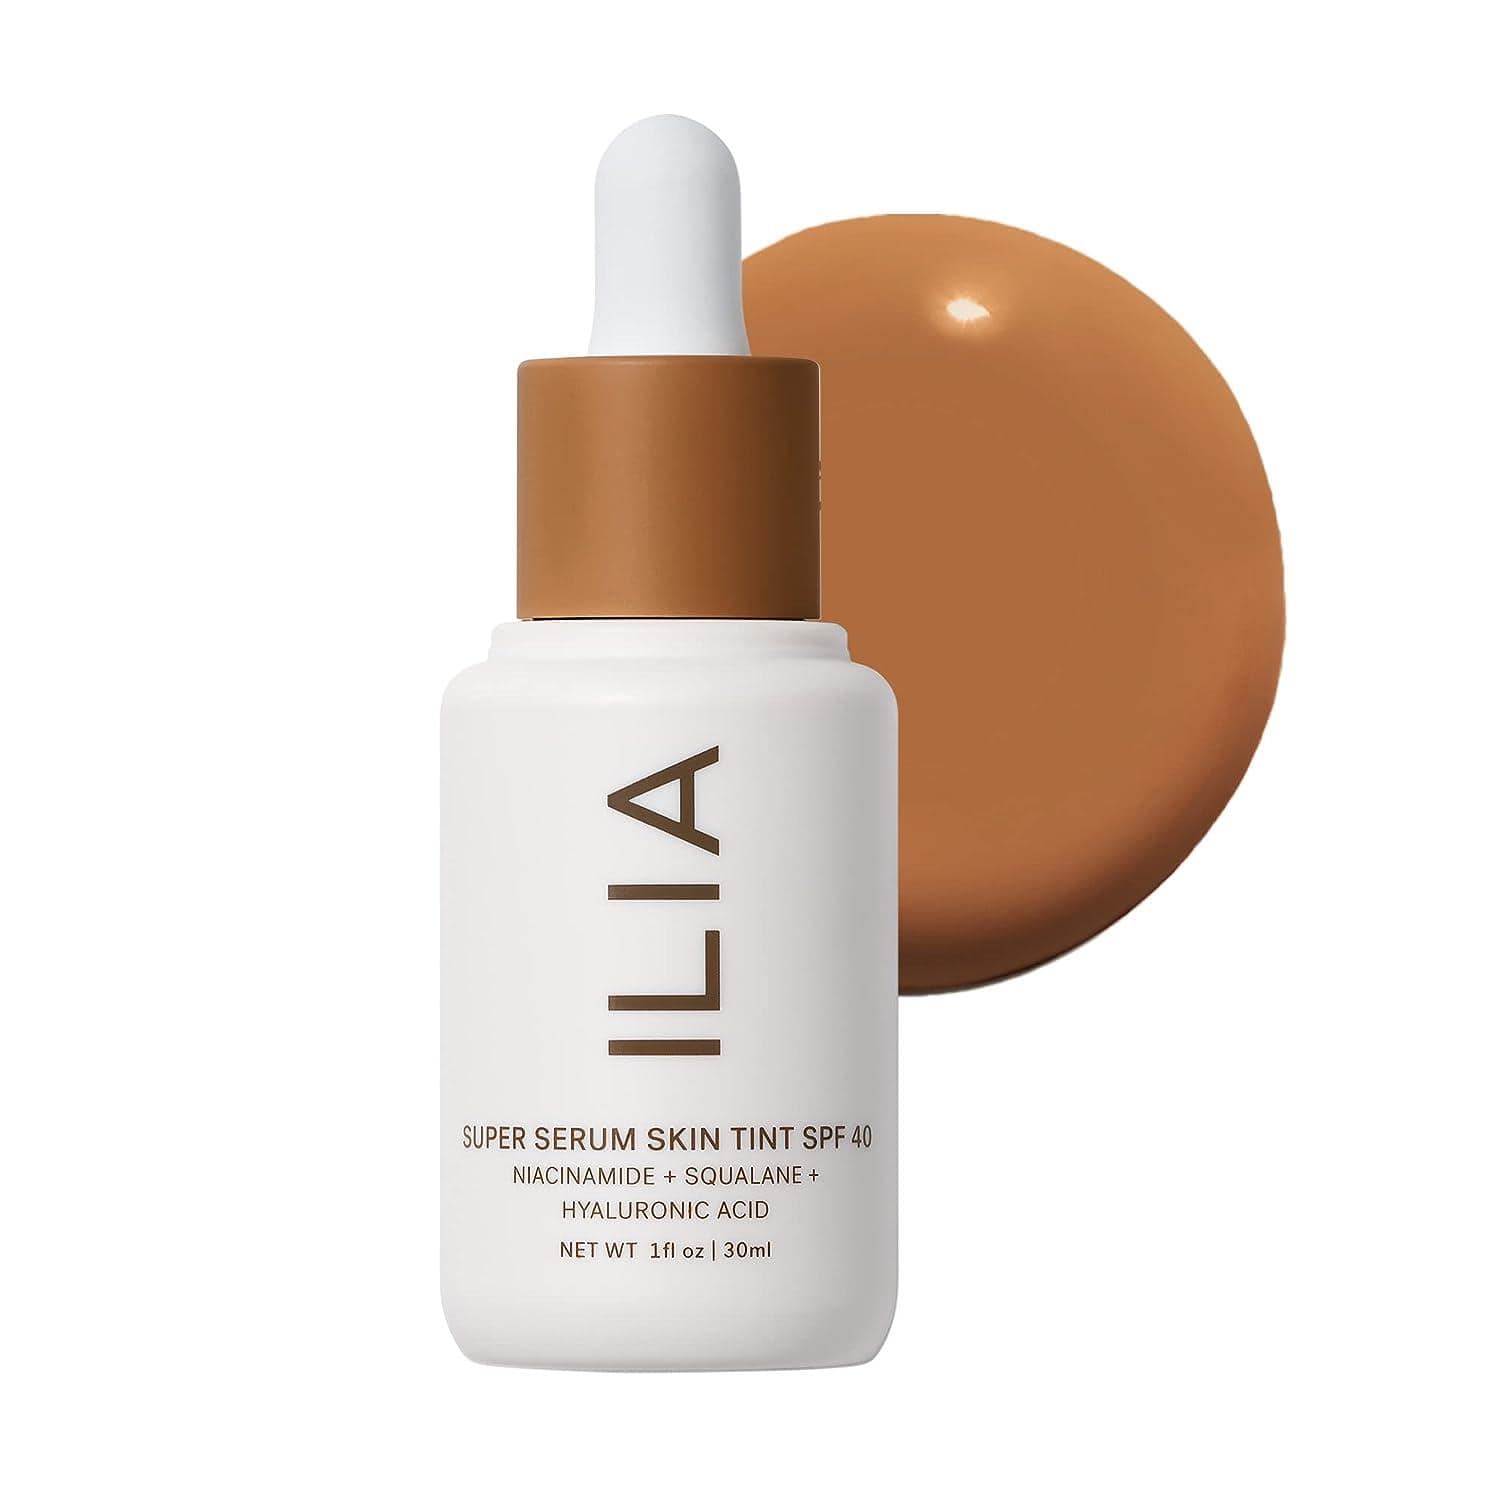 Loving Ilia's Super Serum Skin Tint for the glazed doughnut look-an essential for a comfortable, long-lasting glow. Its hydrating dewy finish, enriched with natural ingredients, hyaluronic acid, and SPF 40, strikes the perfect balance with a touch of setting powder. 